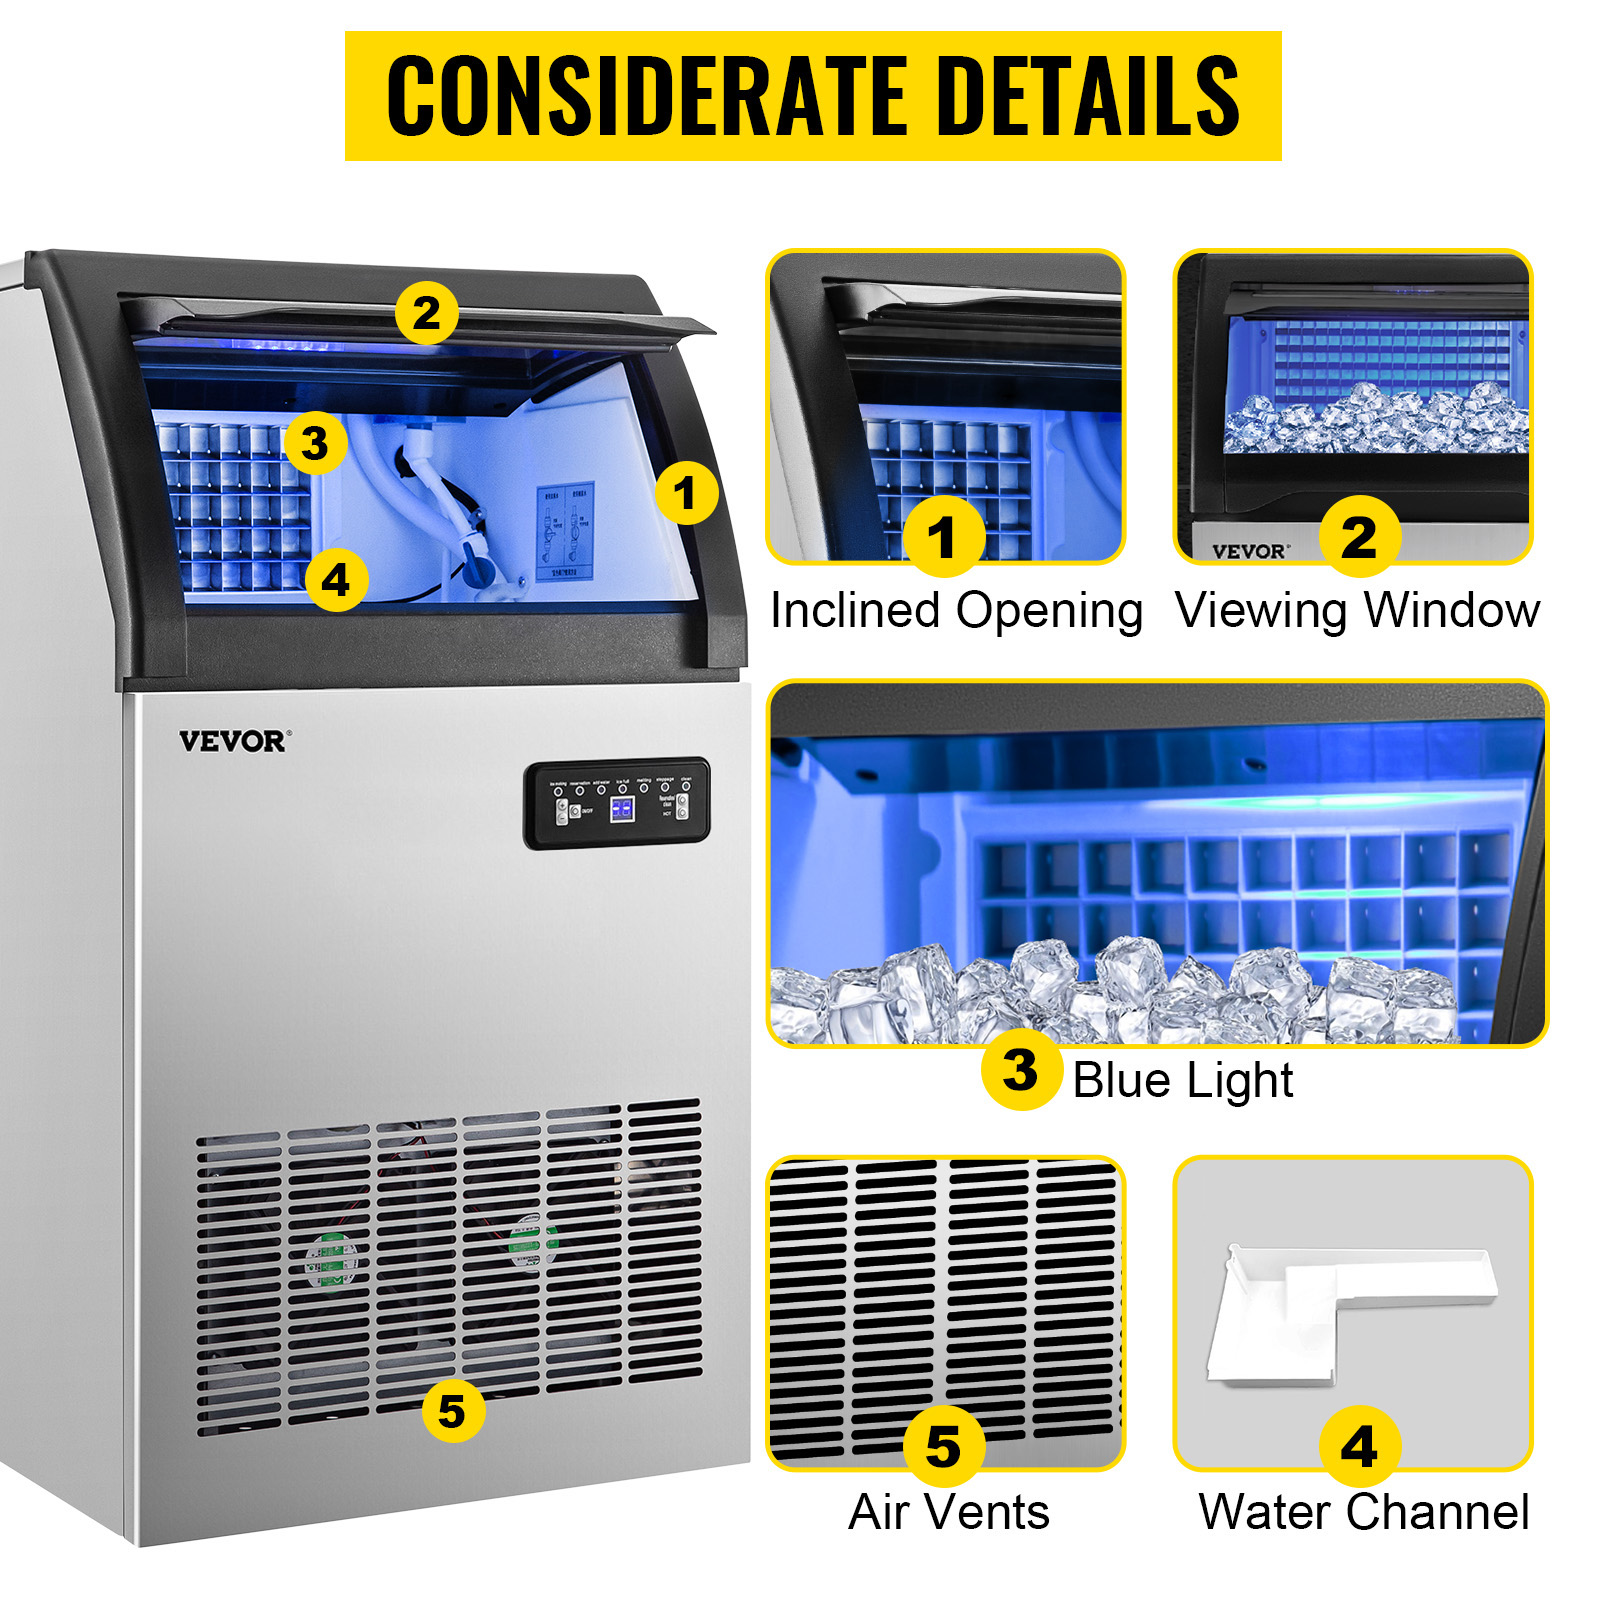 VEVOR 110V Countertop Ice Maker 70LB/24H, 350W Automatic Portable Ice  Machine with 11LB Storage, 36Pcs per Tray, Auto Operation, Blue Light,  Include Water Filter, Drain Pipe, Scoop